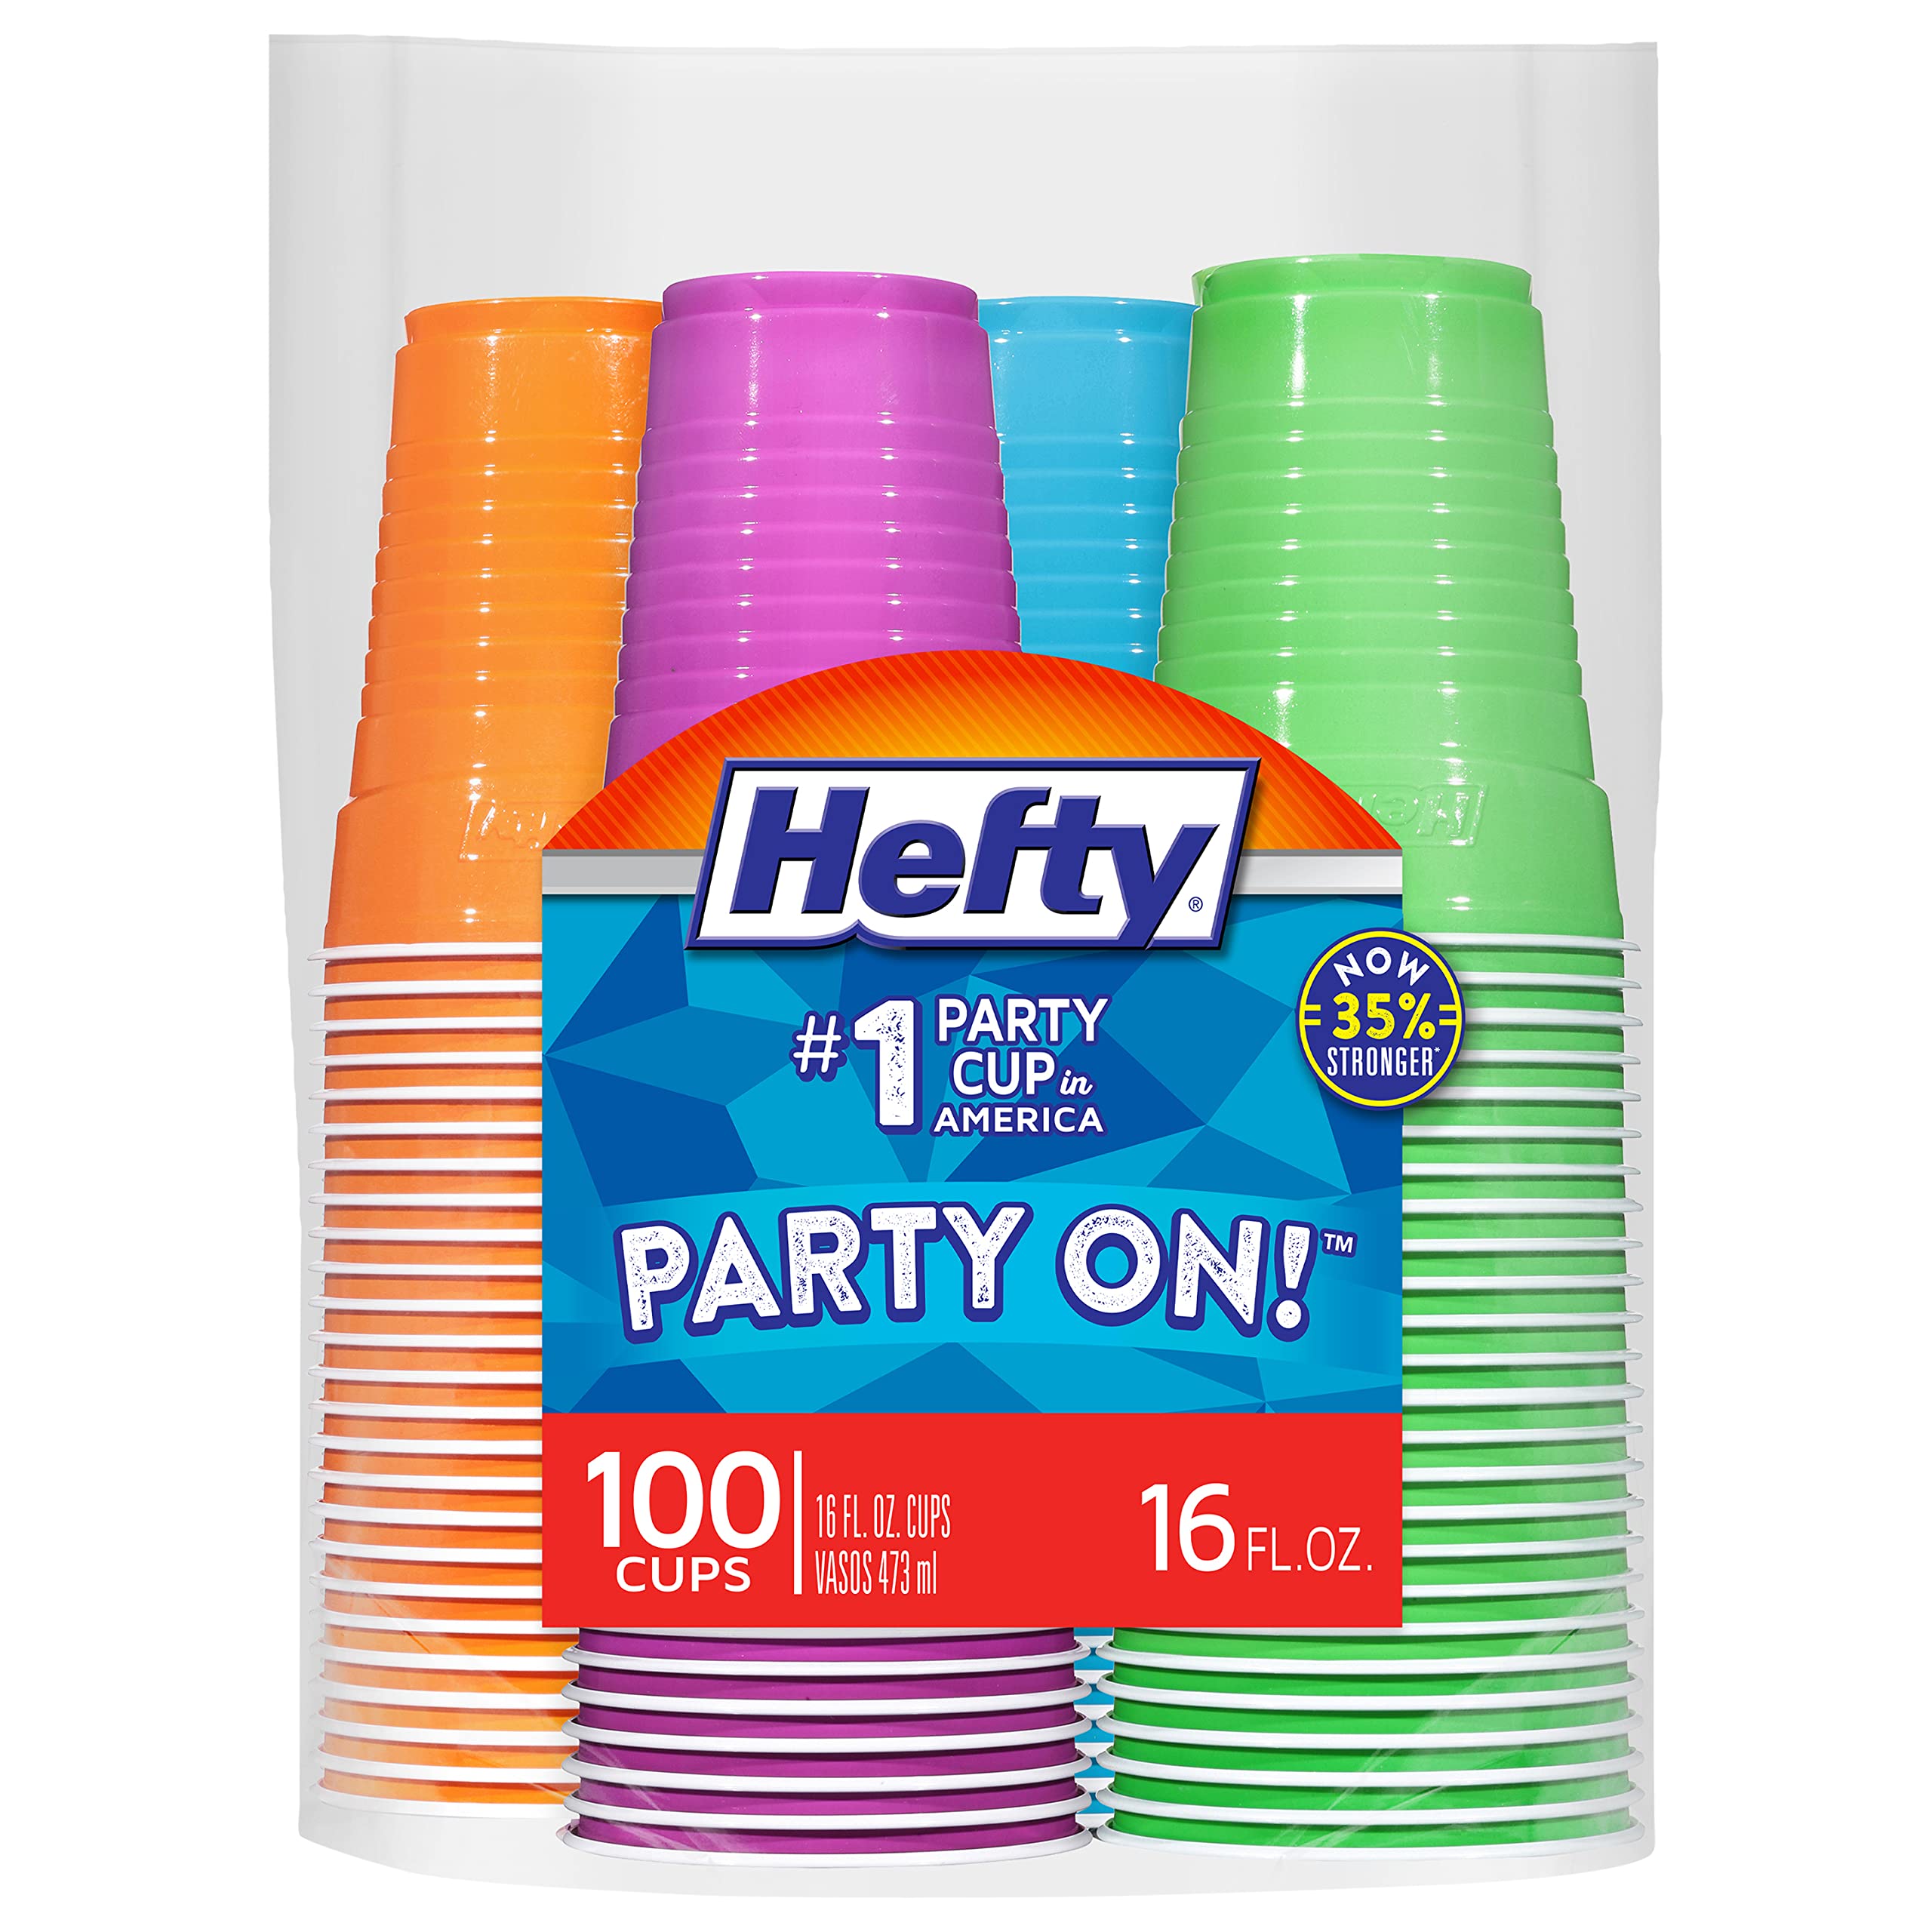 Hefty Everyday 16 oz Disposable Party Cup, 101 Count (Pack of 1), Assorted Bright